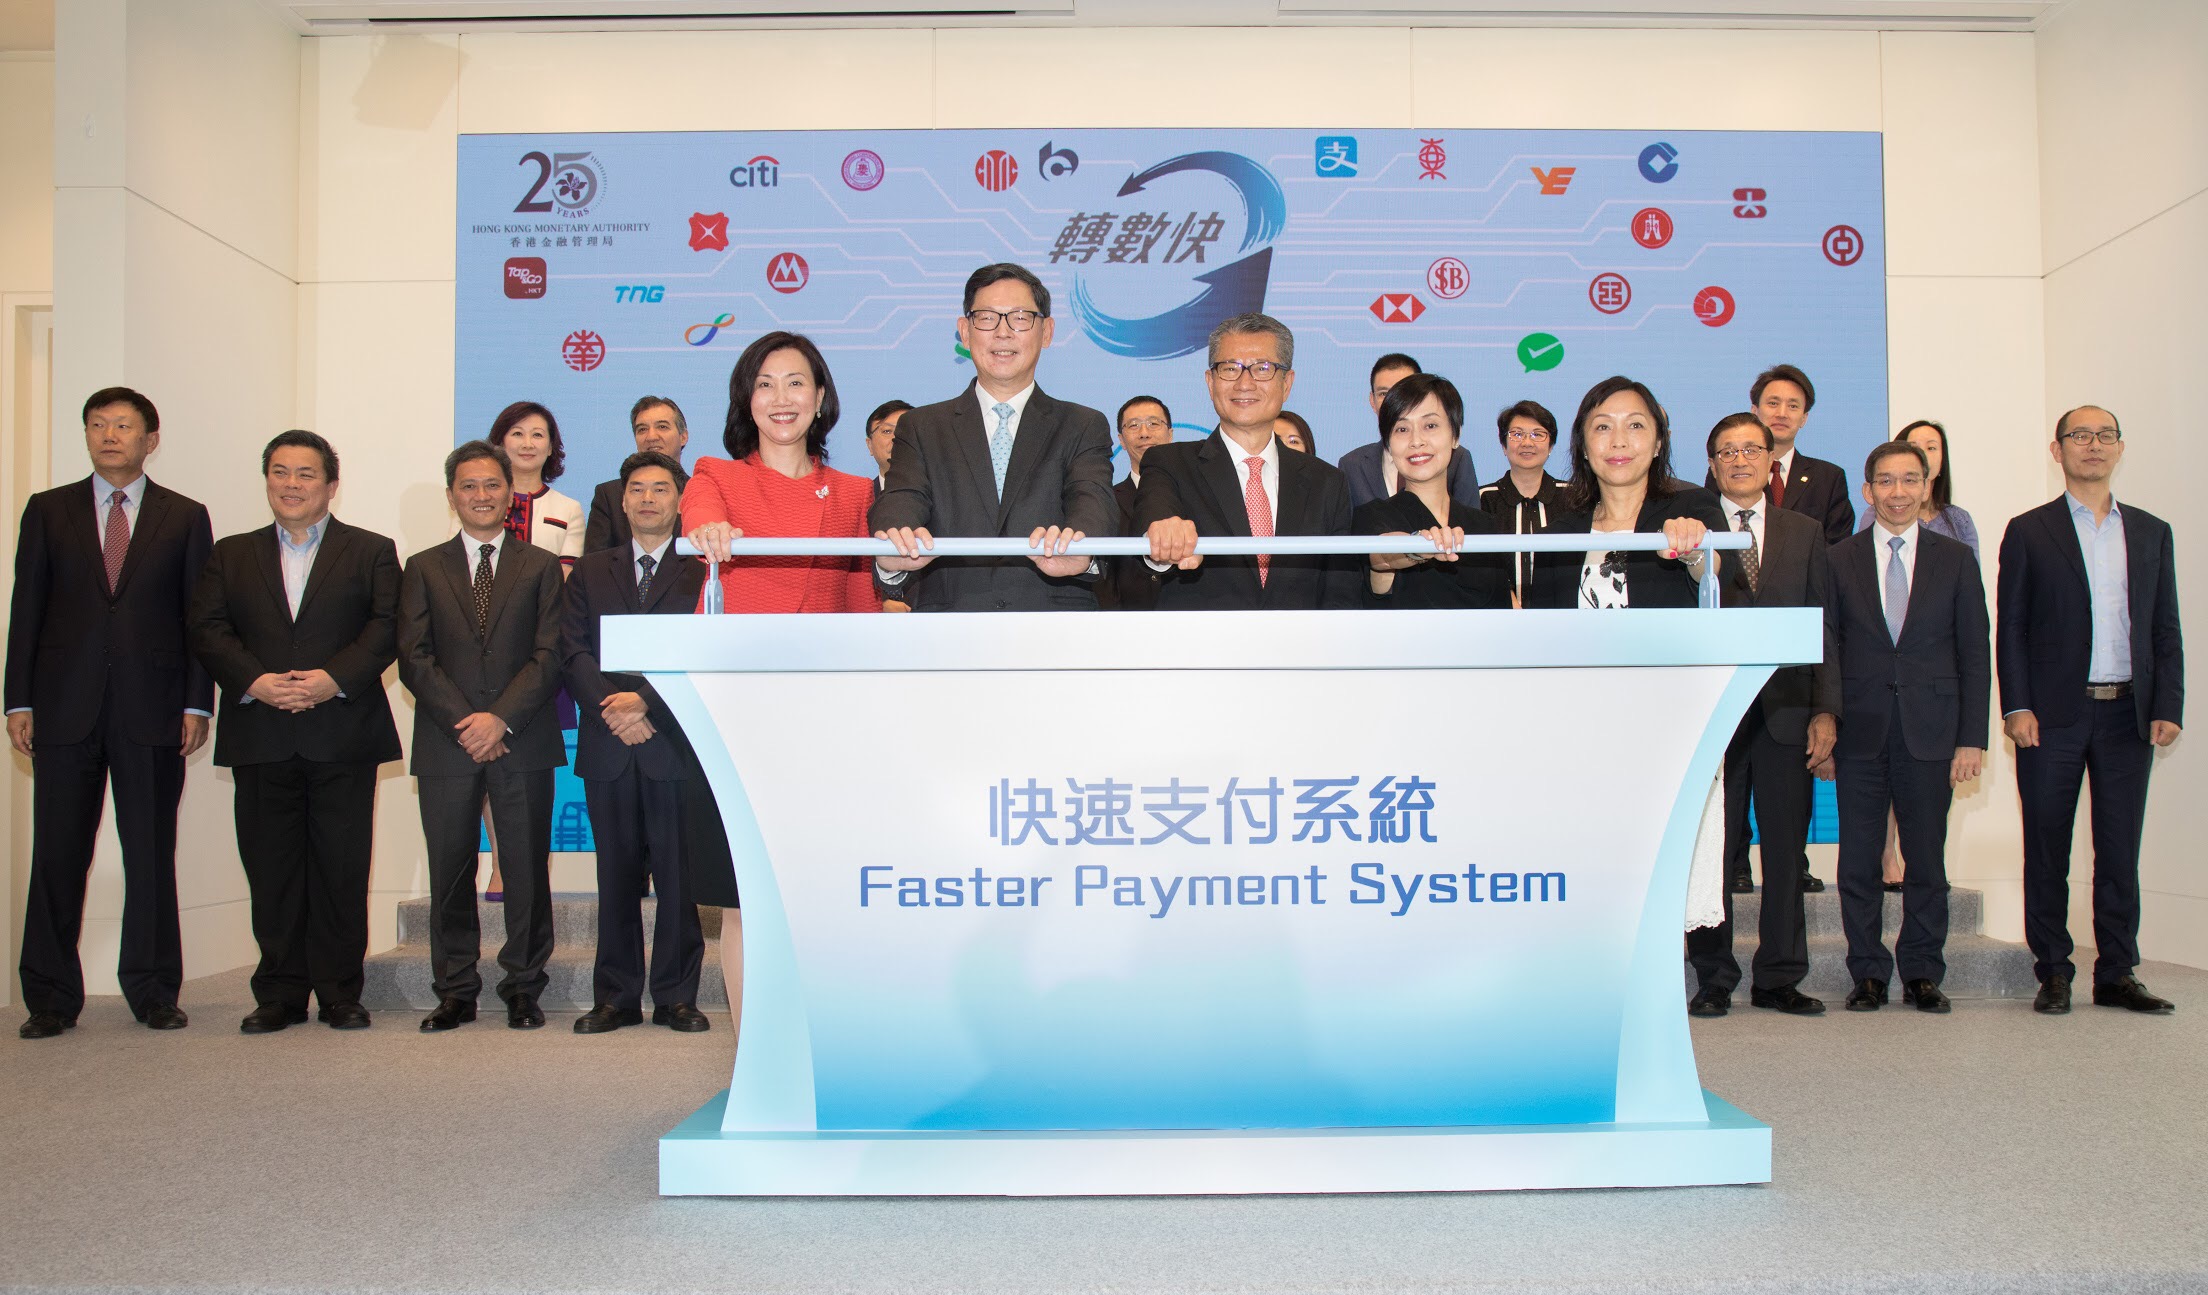 Launch of Faster Payment System (FPS)